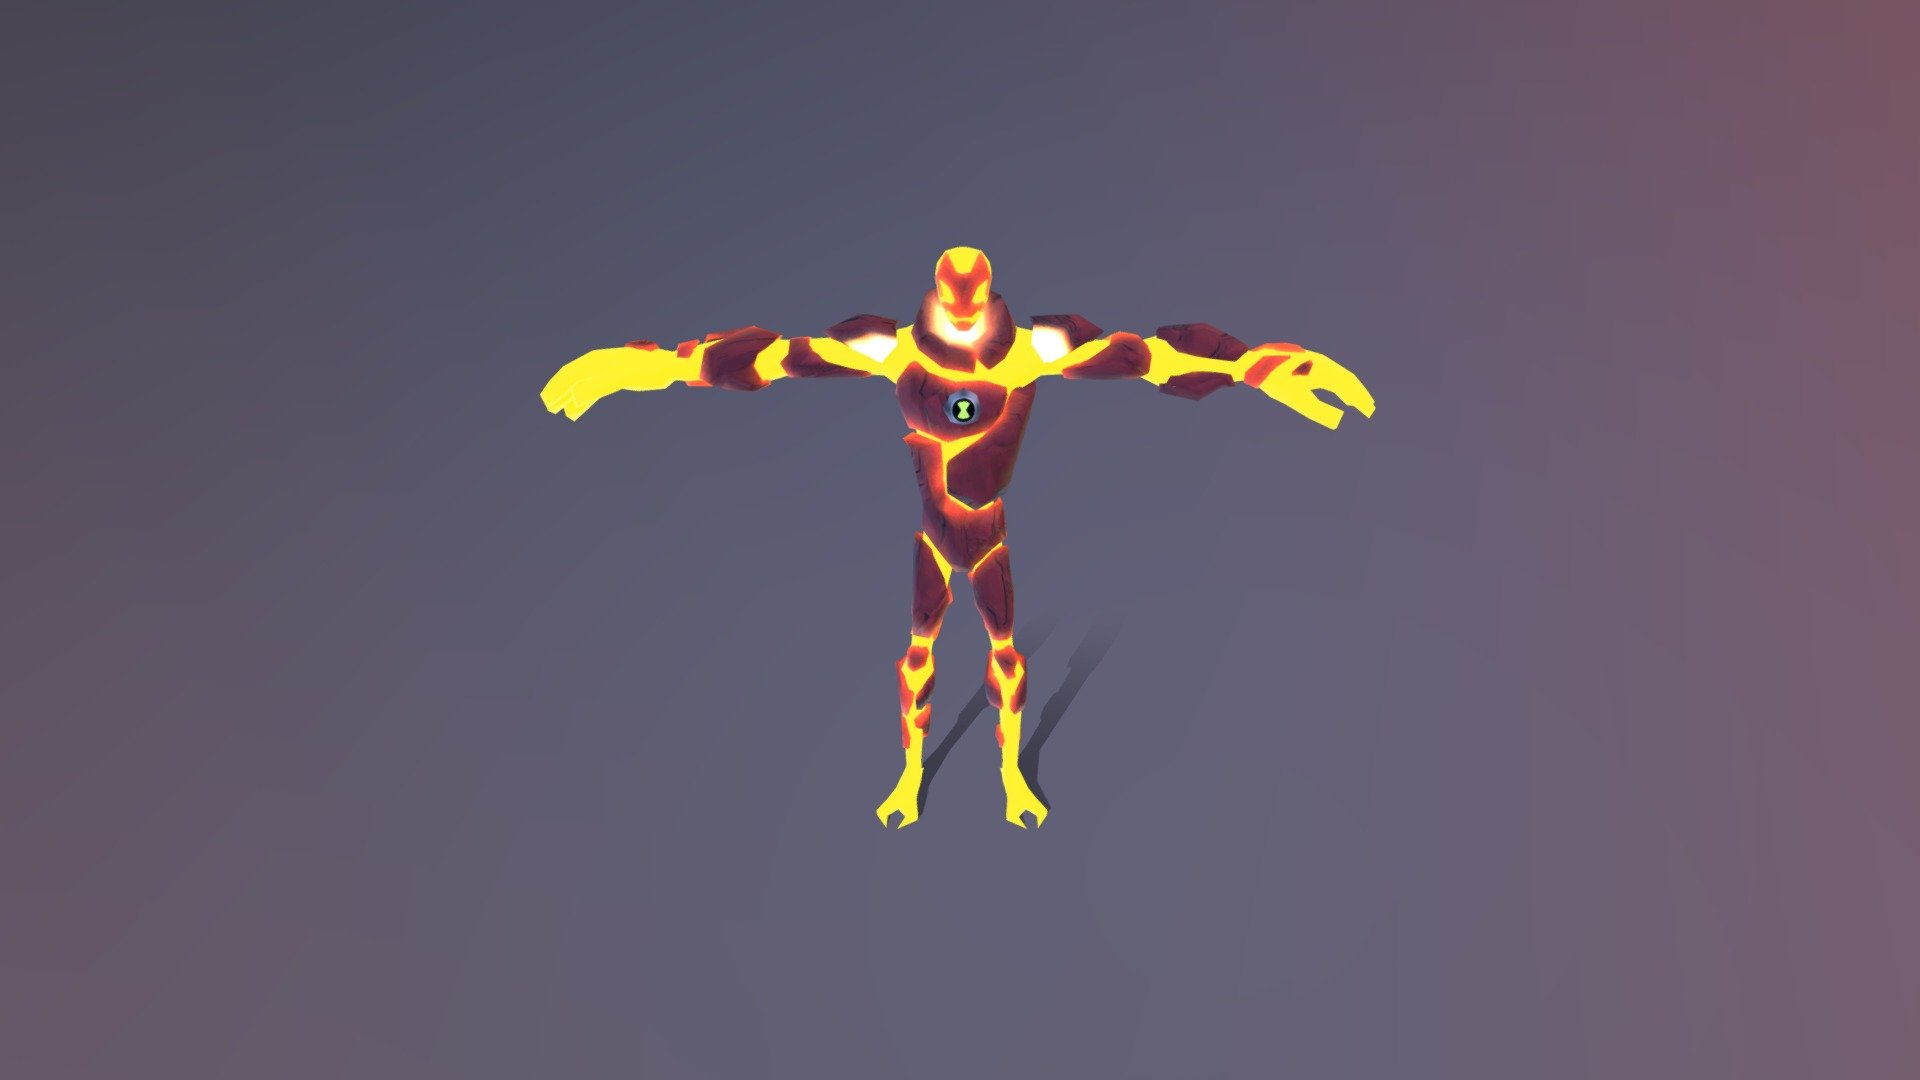 Heatblast of Ben 10 Omniverse!!! Yeaahhhhh!!
Do not forget to follow in my social media, specially on my Youtube channel for have interest of submitting more. Also, cannon bolt is WIP. Thanks! - Heatblast of Ben 10 Omniverse - Download Free 3D model by Spiderware 3d model